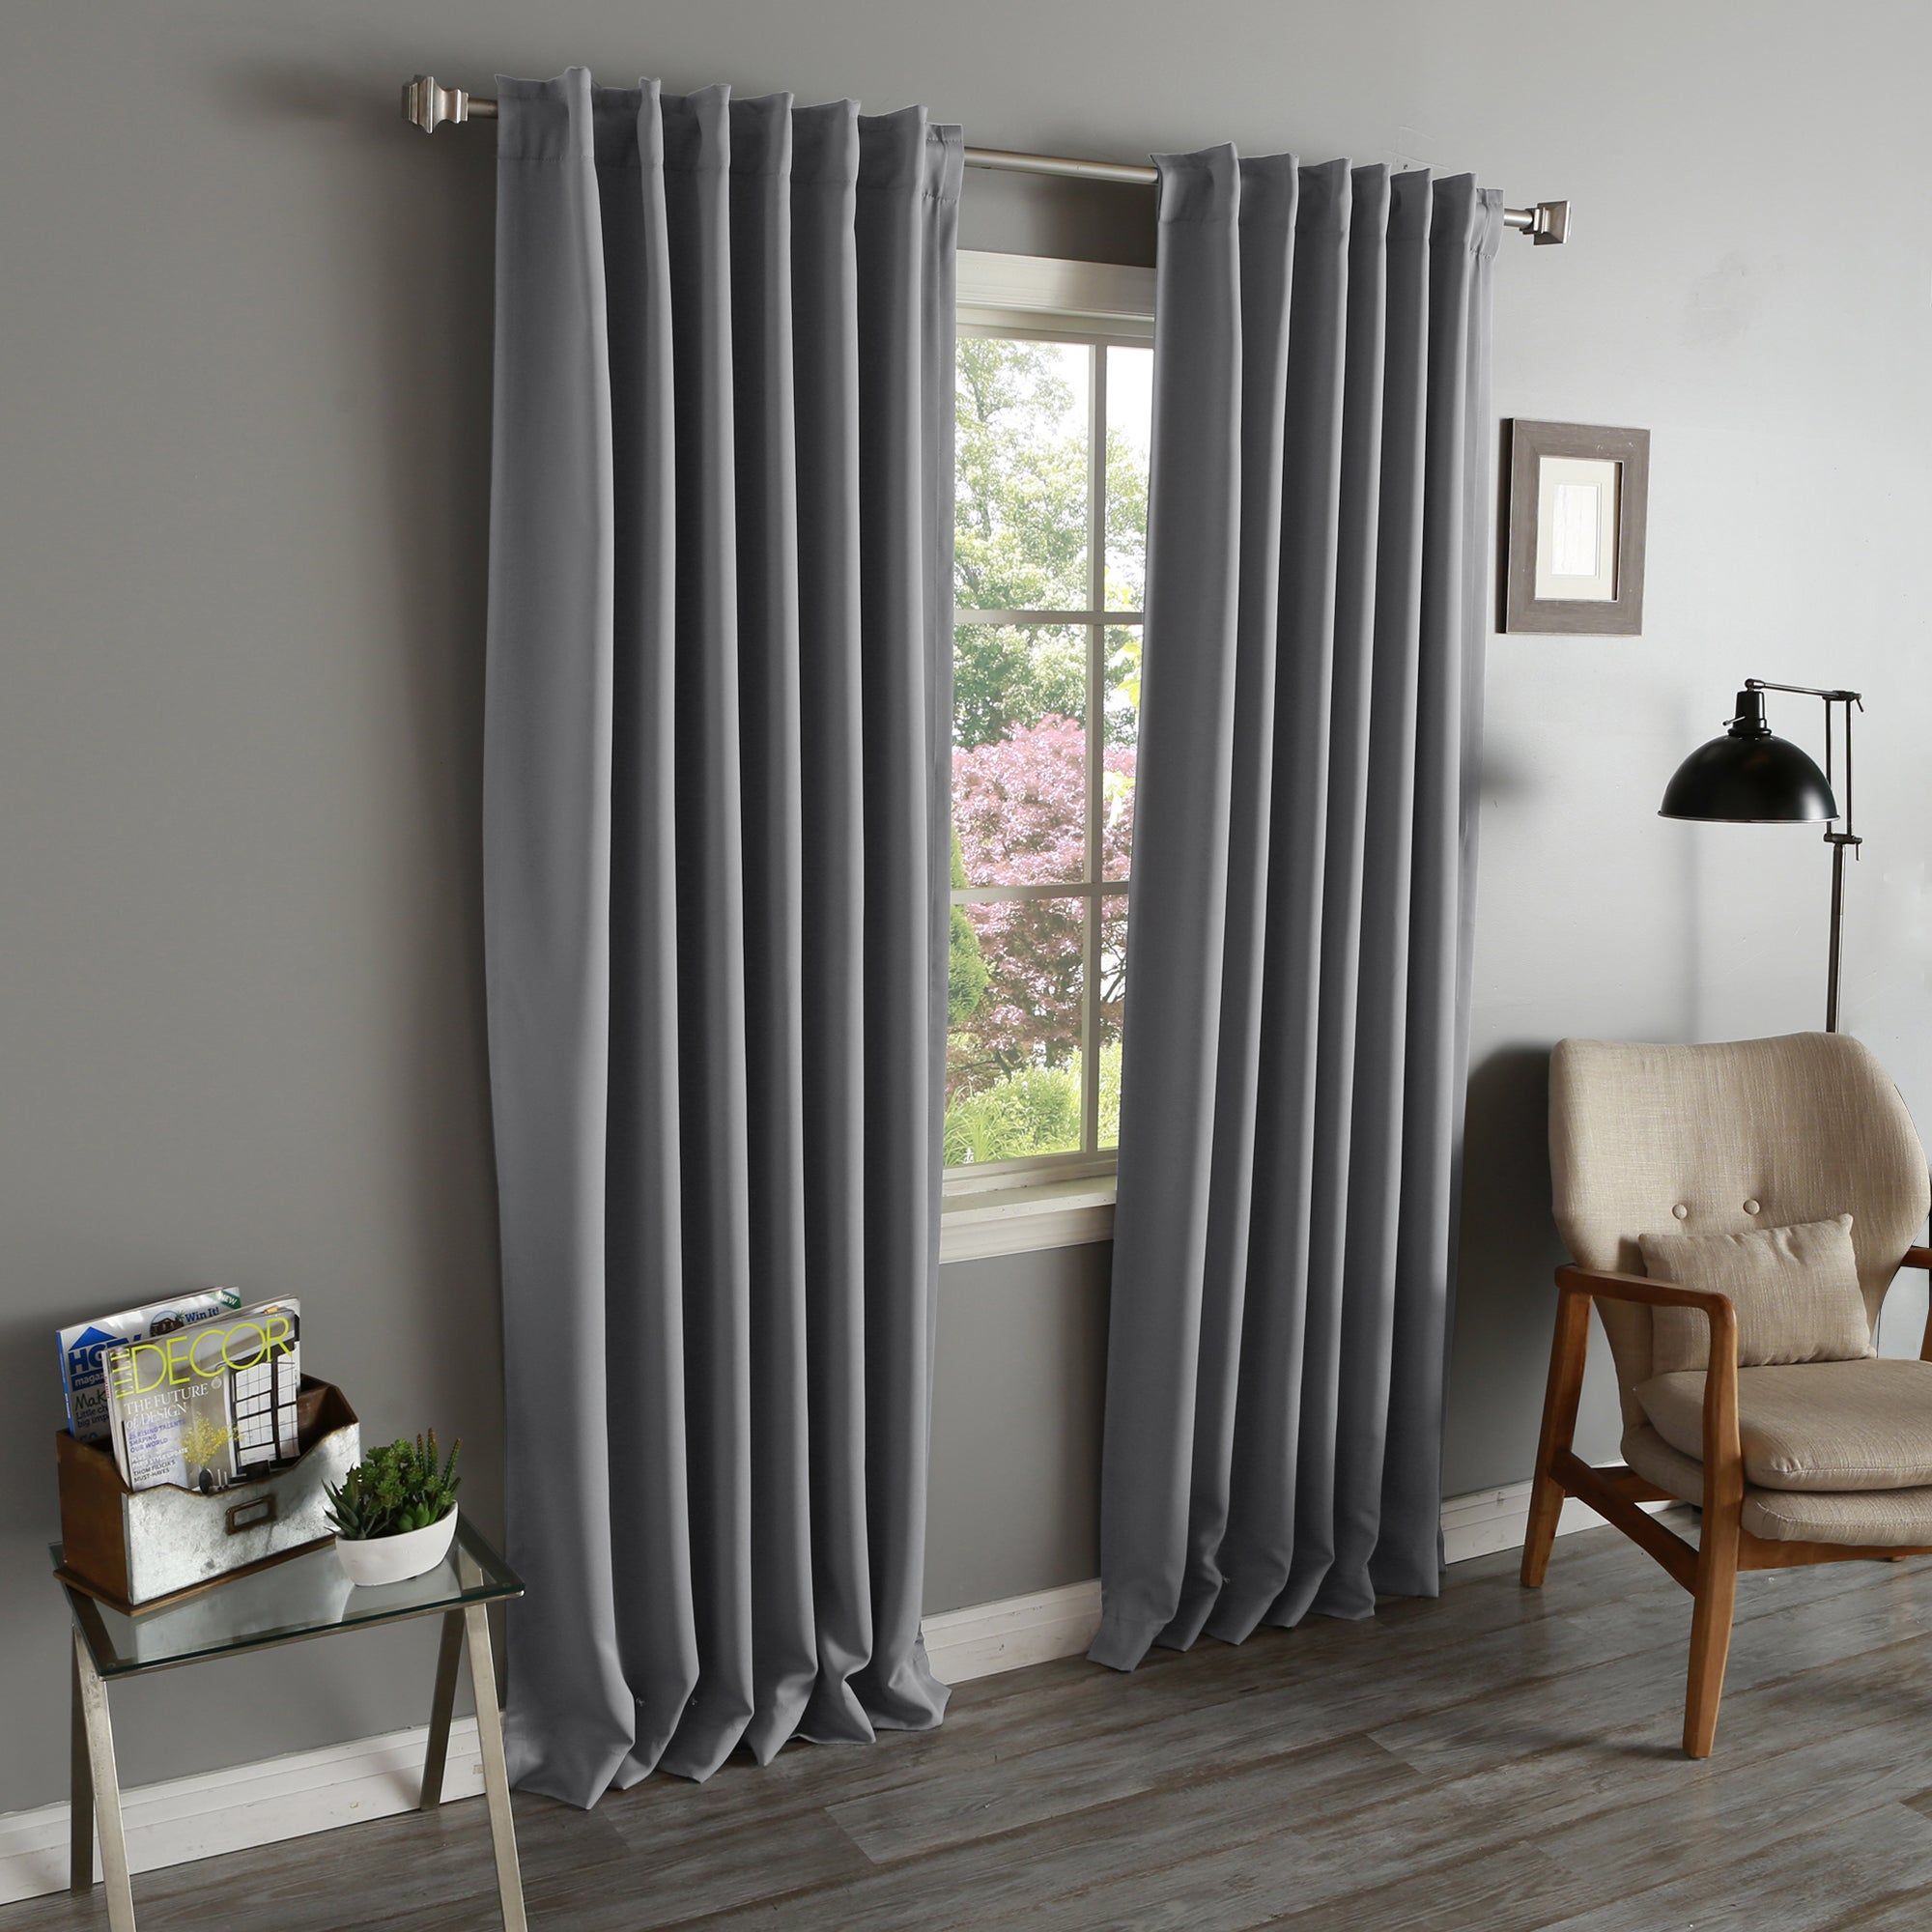 Aurora Home Solid Insulated Thermal Blackout Long Length Curtain Panel Pair With Solid Insulated Thermal Blackout Long Length Curtain Panel Pairs (View 3 of 30)